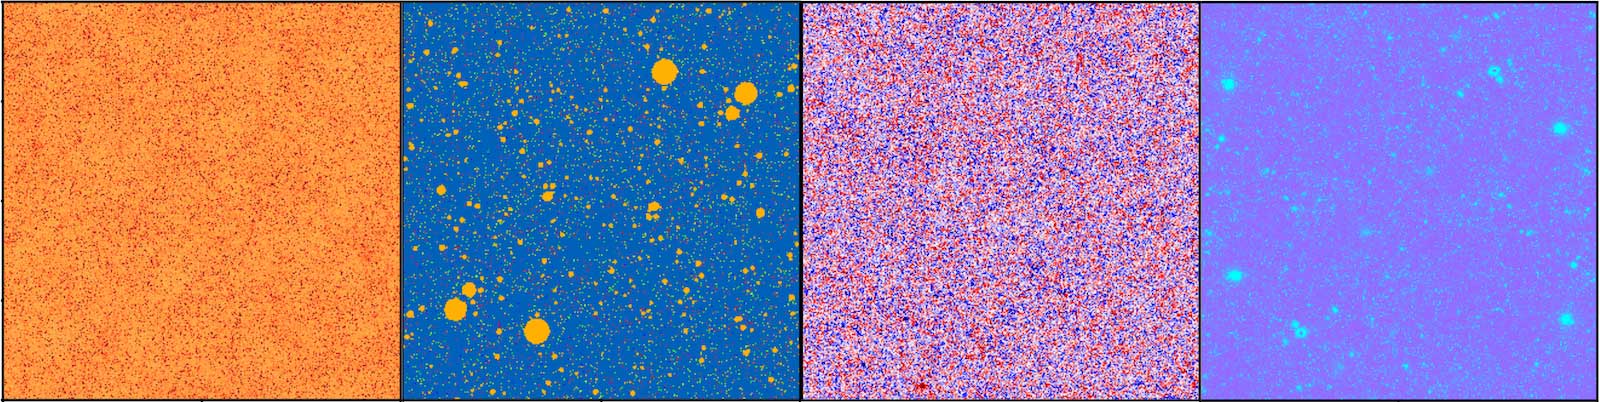 These images show different types of emissions that can interfere with CMB lensing measurements, as simulated by Neelima Sehgal and collaborators. From left to right: The cosmic infrared background, composed of intergalactic dust; radio point sources, or radio emission from other galaxies; the kinematic Sunyaev-Zel’dovich effect, a product of gas in other galaxies; and the thermal Sunyaev-Zel’dovich effect, which also relates to gas in other galaxies. (Credit: Emmanuel Schaan and Simone Ferraro/Berkeley Lab)